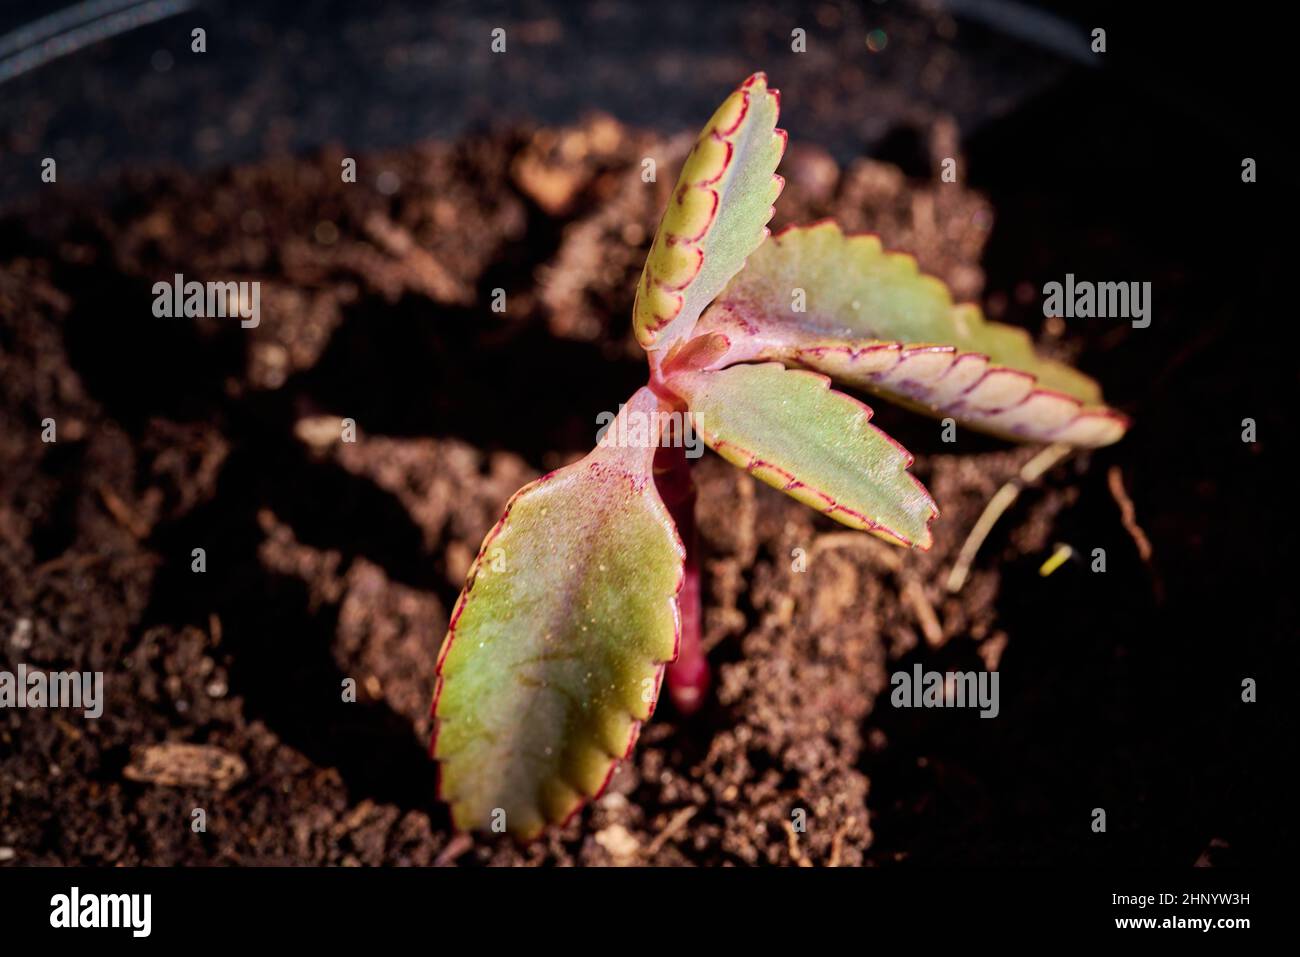 Small succulent plant recently sprouted with green leaves and reddish tones Stock Photo